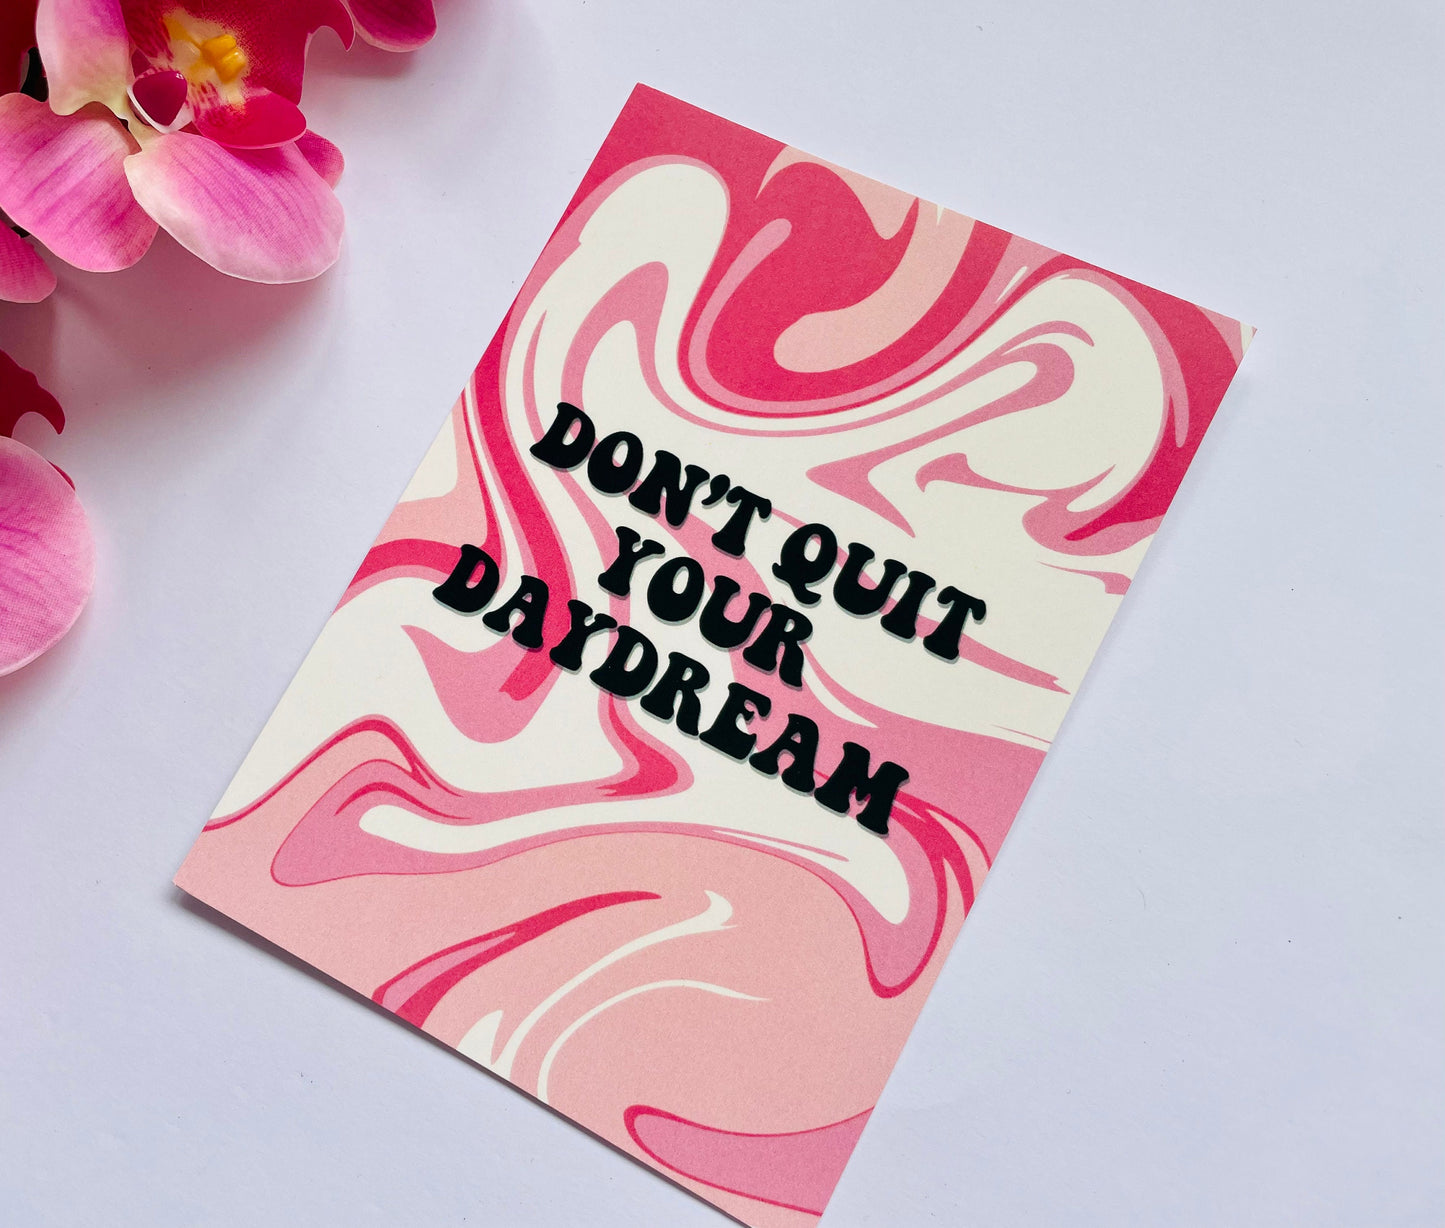 Don't Quit Your Daydream Postcard